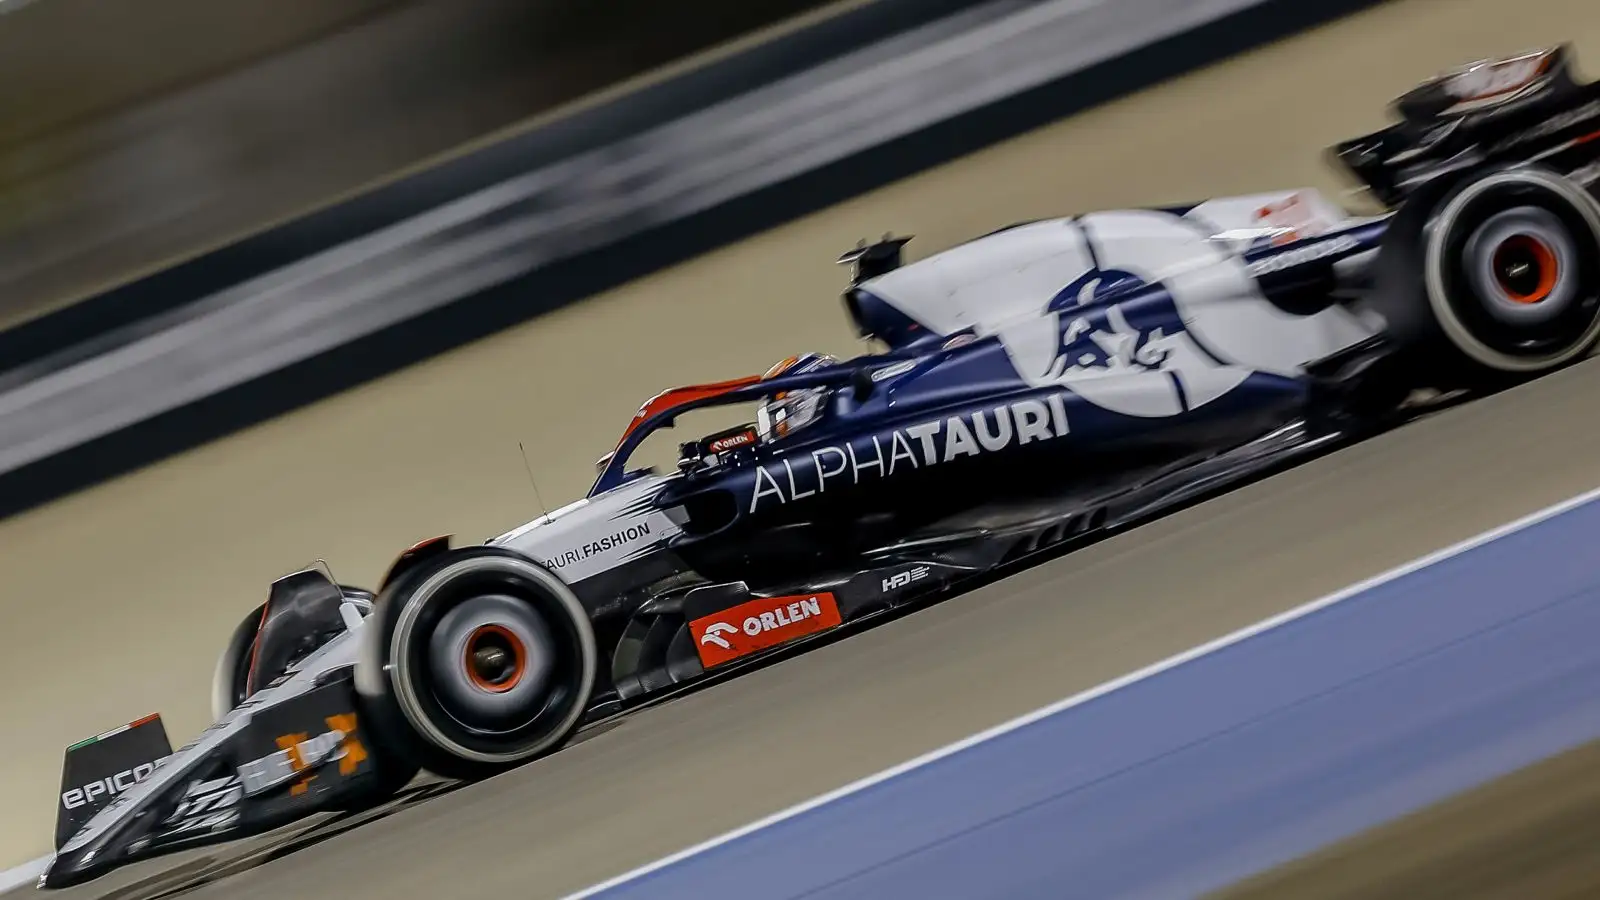 AlphaTauri driver Nyck de Vries in action during the F1 season-opening Bahrain Grand Prix. Sakhir, March 2023.